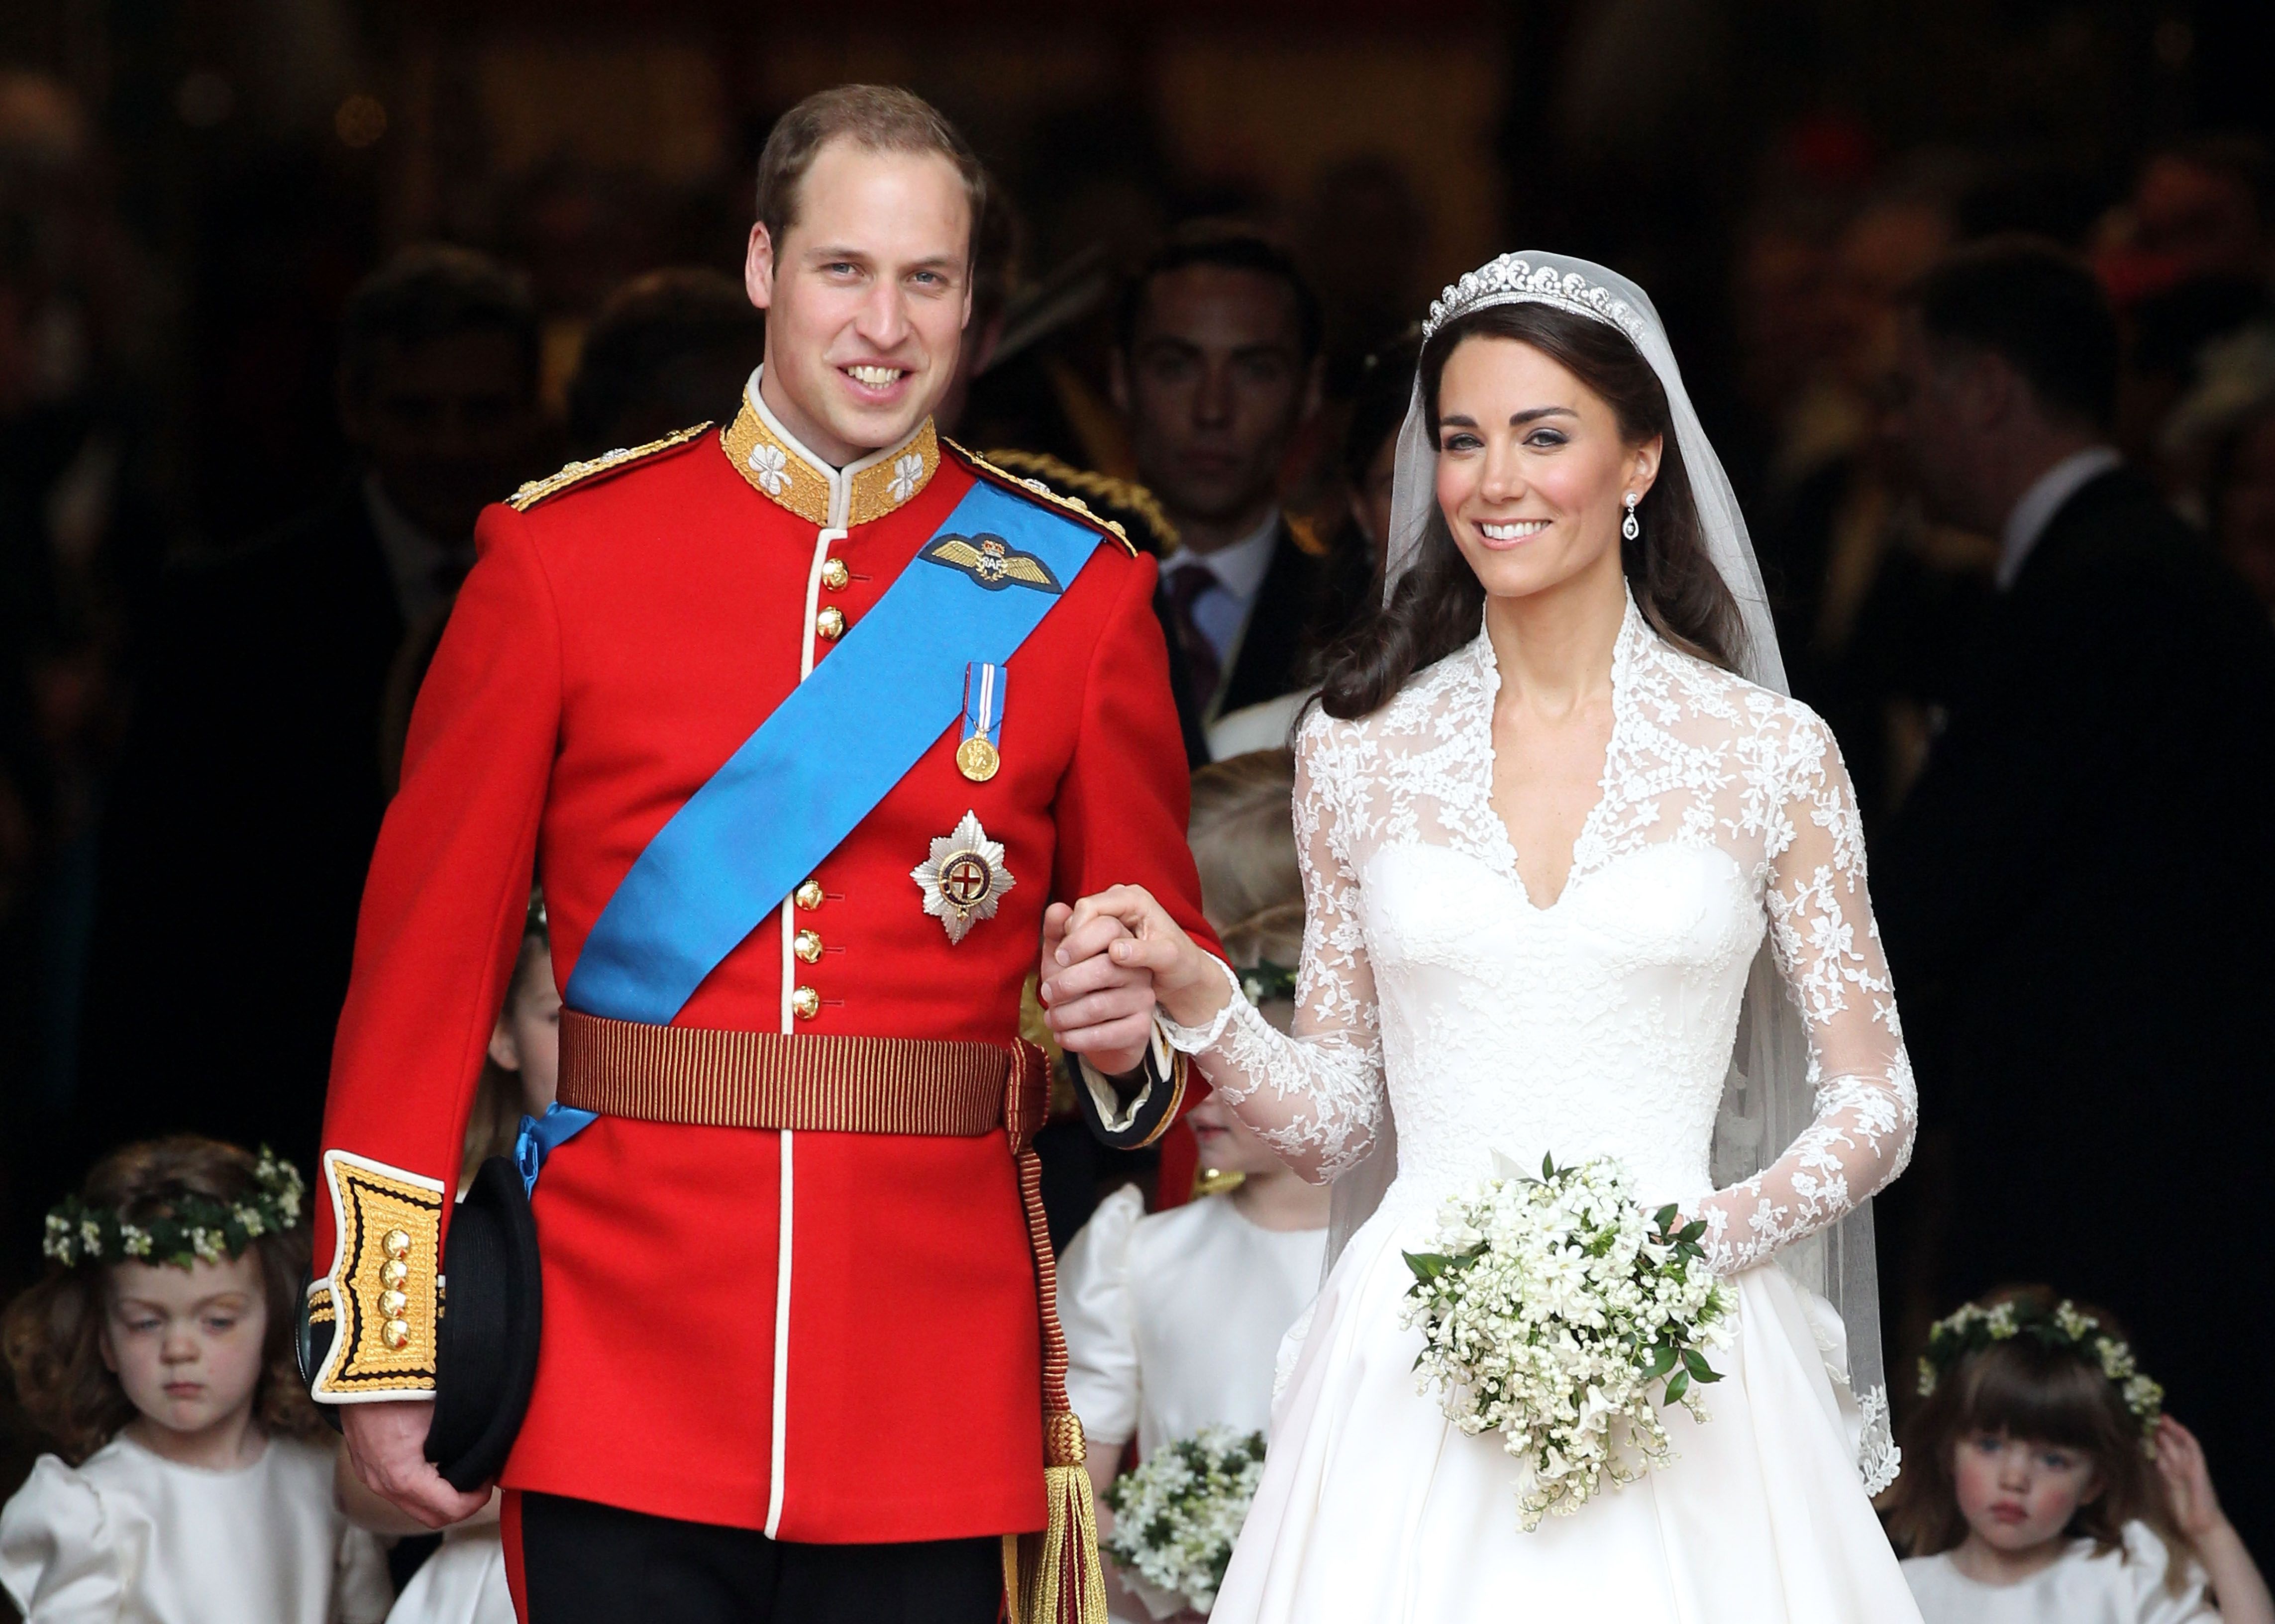 bryder ud beholder gallon 40 Facts About Prince William and Kate Middleton's Royal Wedding